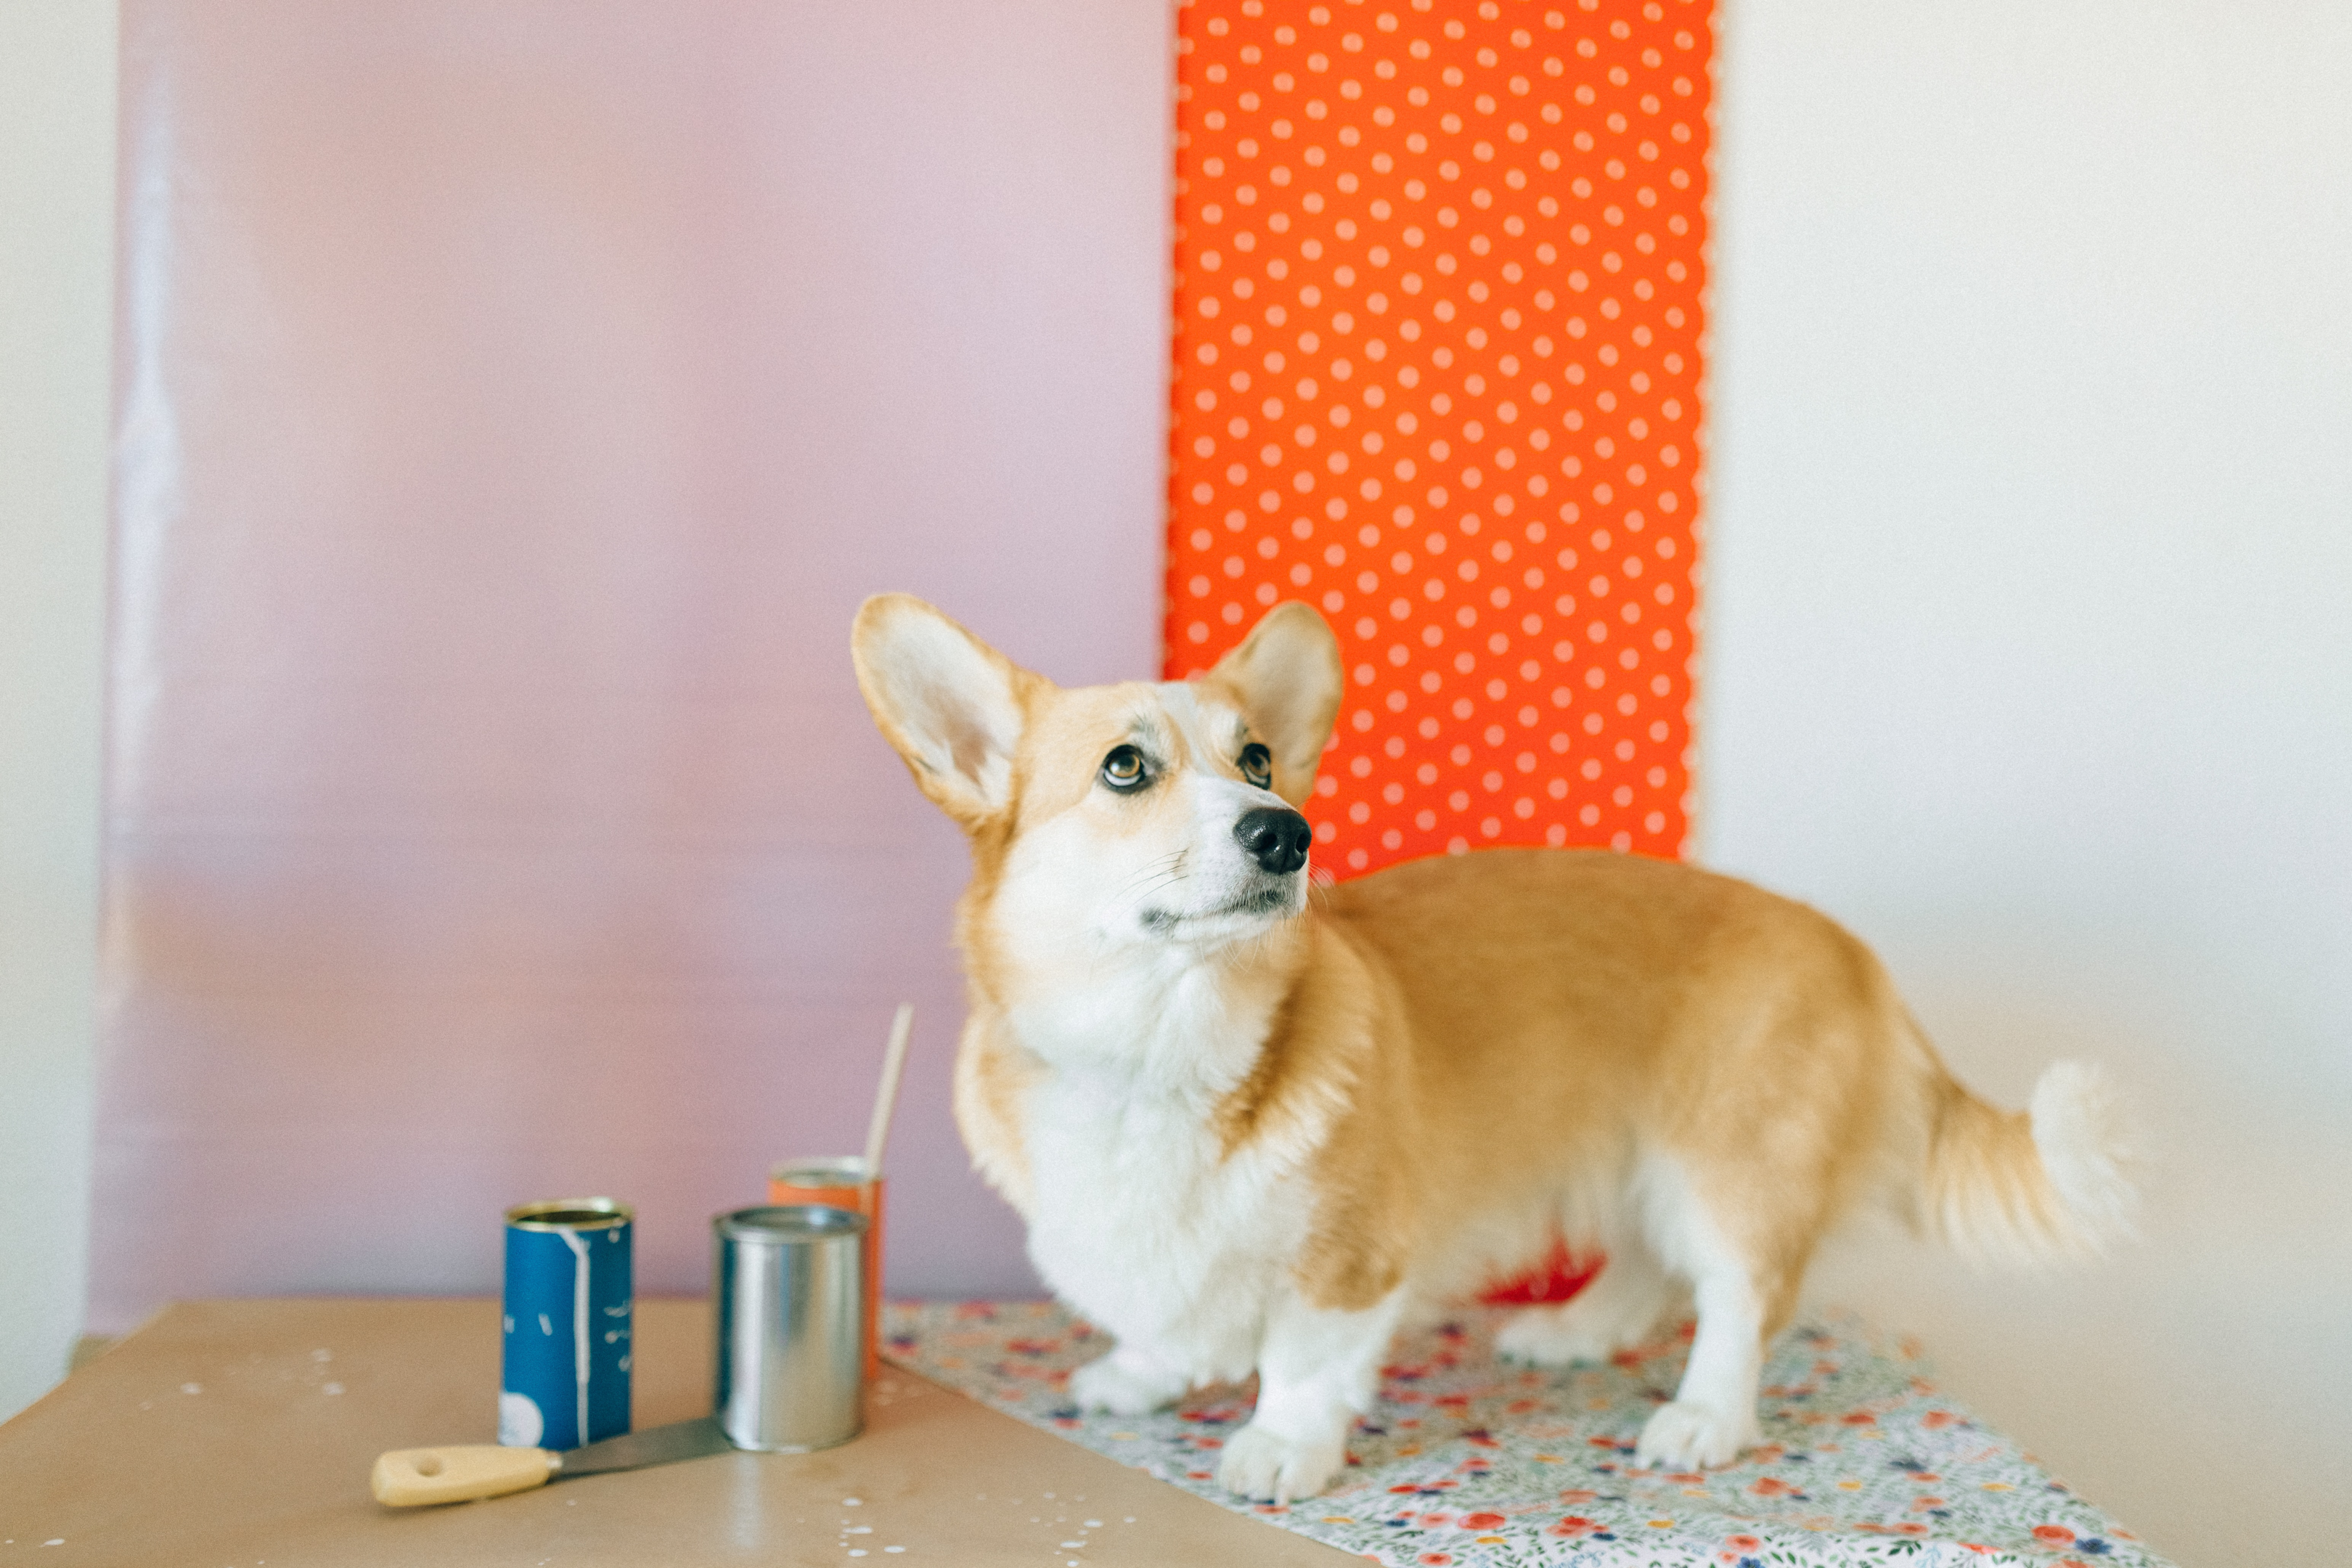 A senior Pembroke Welsh Corgi playing with cans.